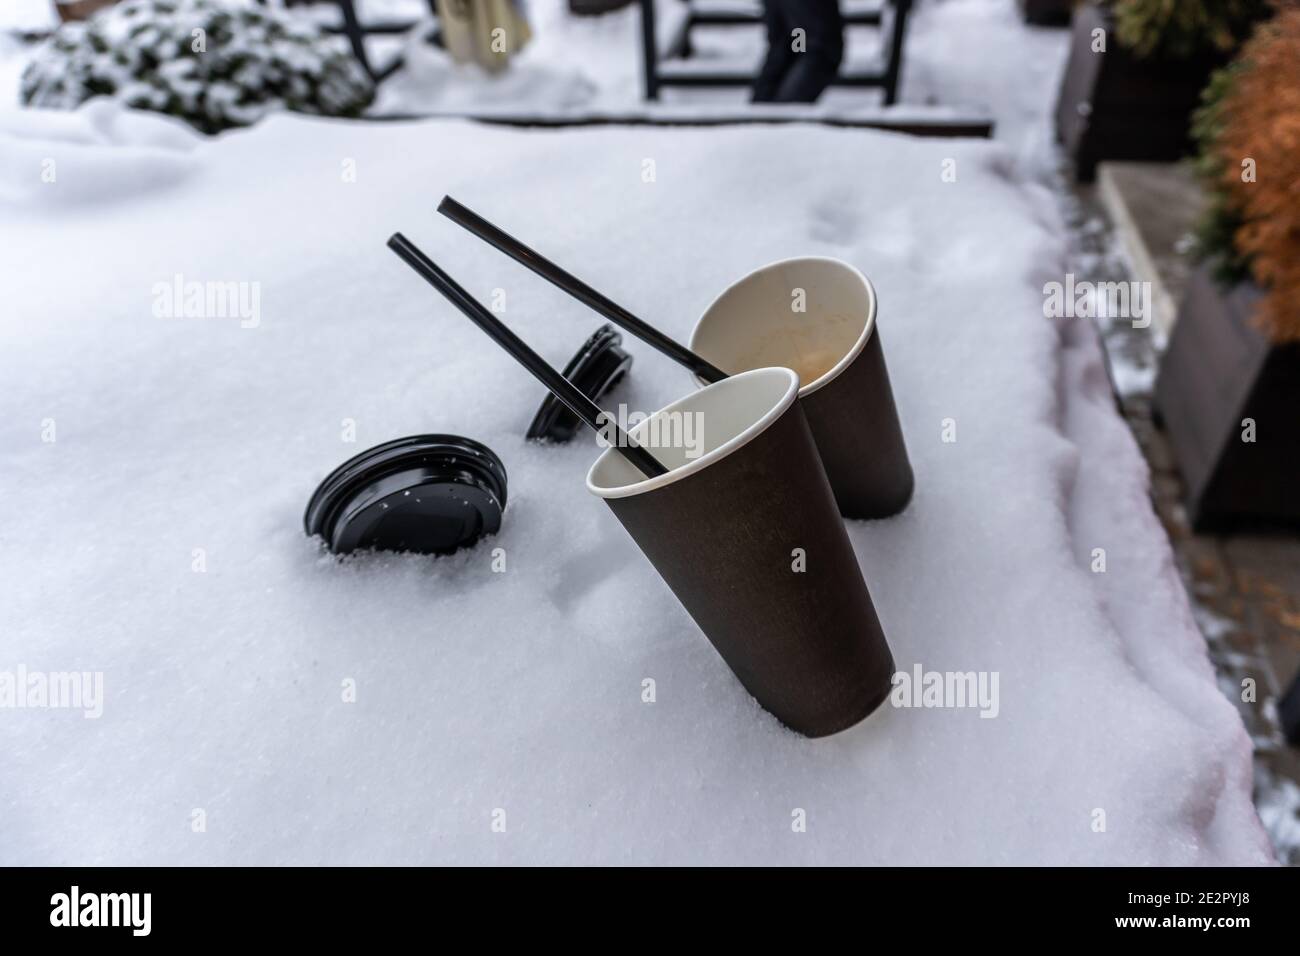 Two coffee cups and straws stick out in the snow on the terrace next to the street cafe Stock Photo